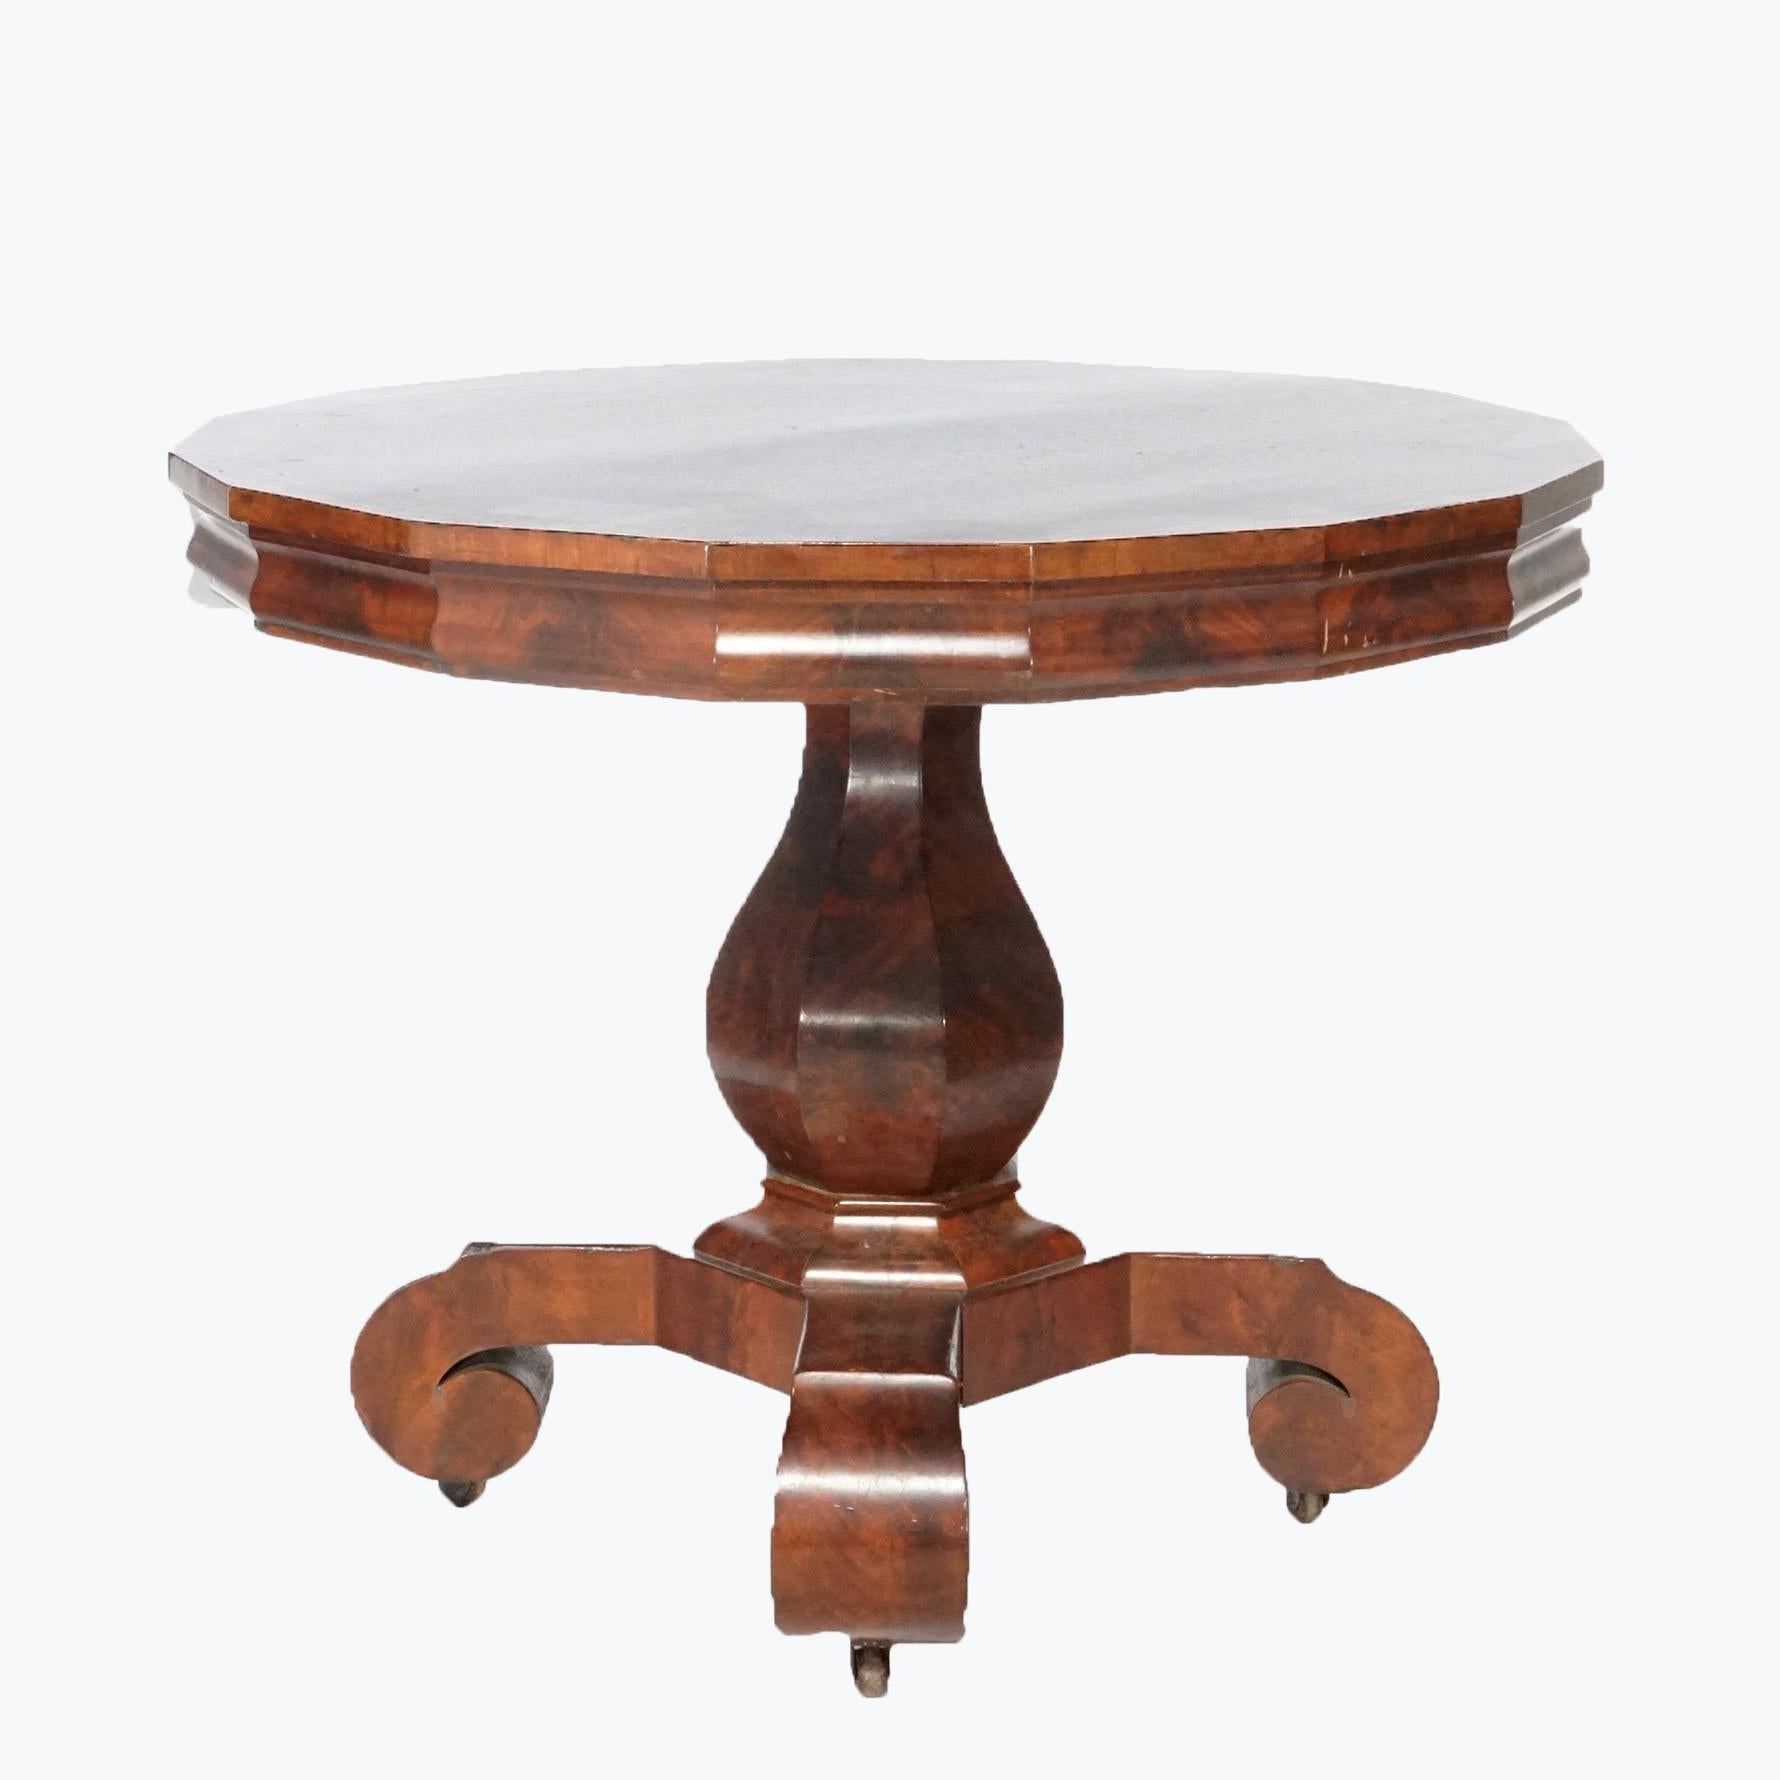 An American Empire center table in the manner of Meeks offers flame mahogany construction with faceted top raised on stylized urn form pedestal with scroll feet, circa 1840

Measures - 28.5